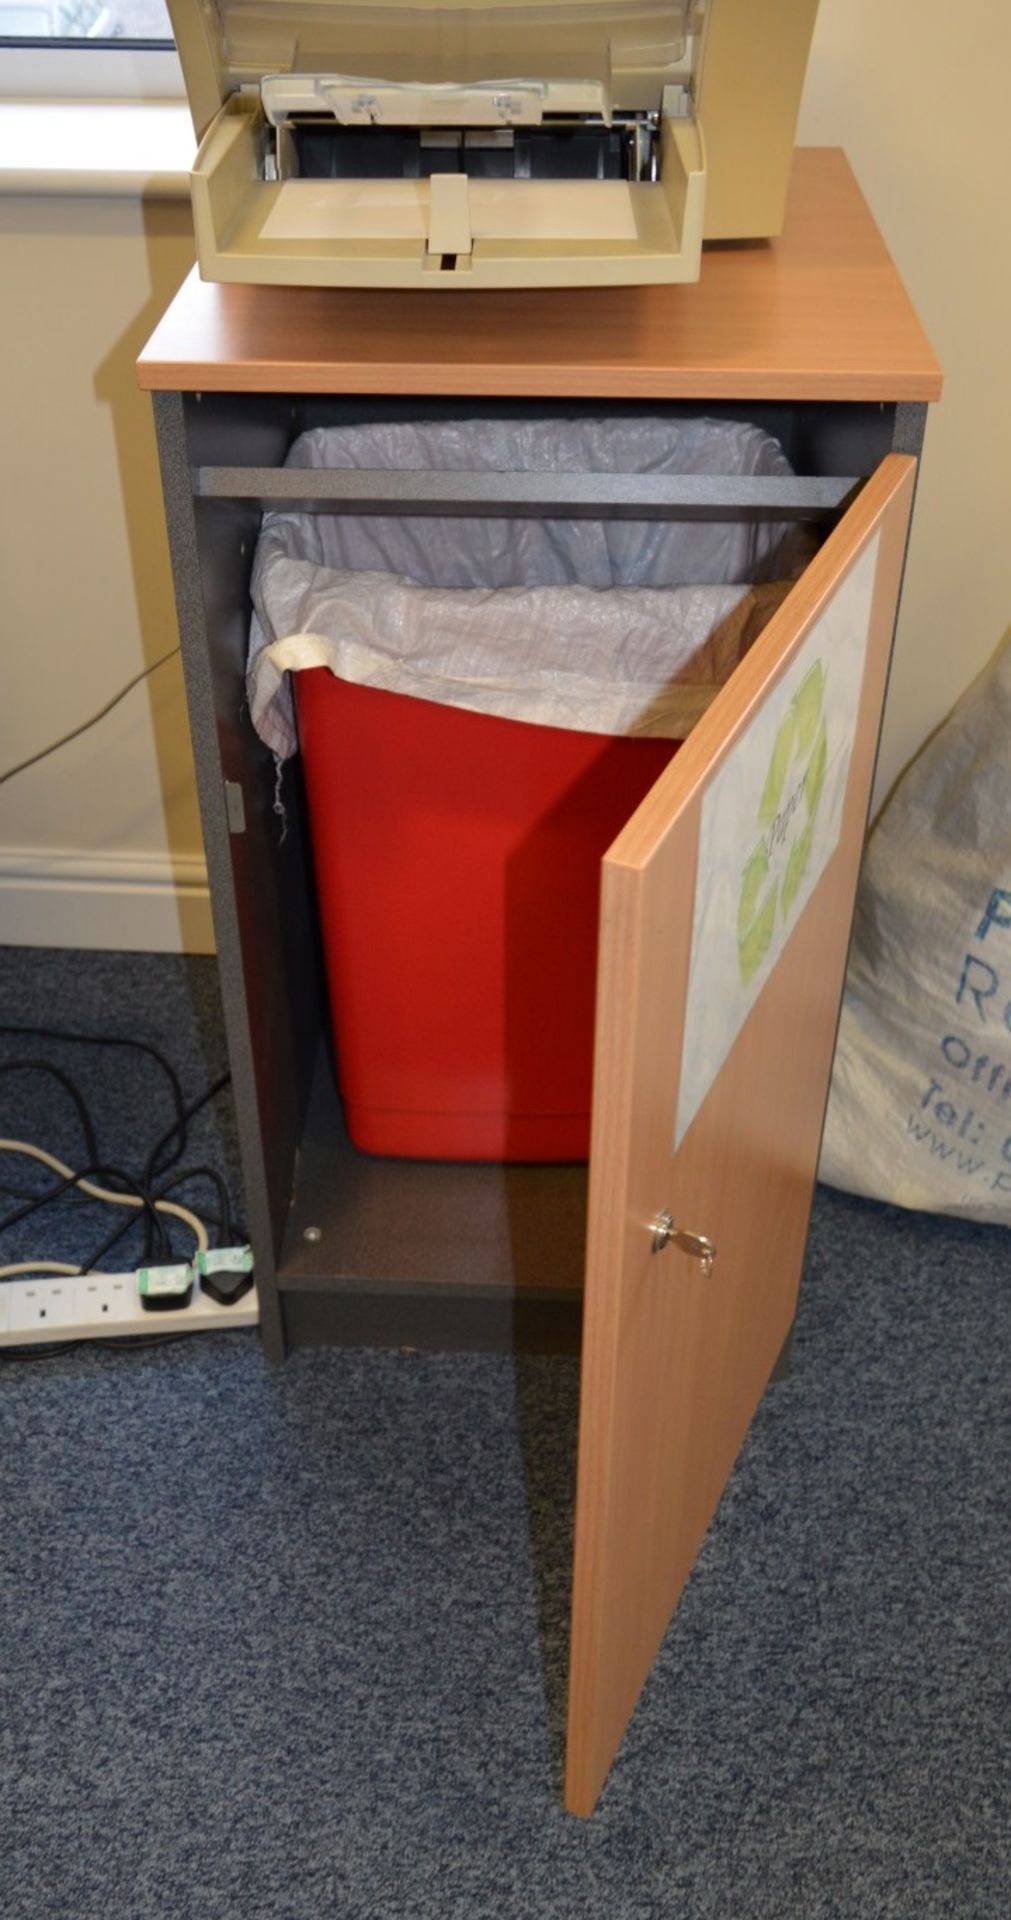 1 x Office Waste Cabinet - Moden Grey and Beech Finish - Ideal For Containing Waste Paper - Includes - Image 3 of 3